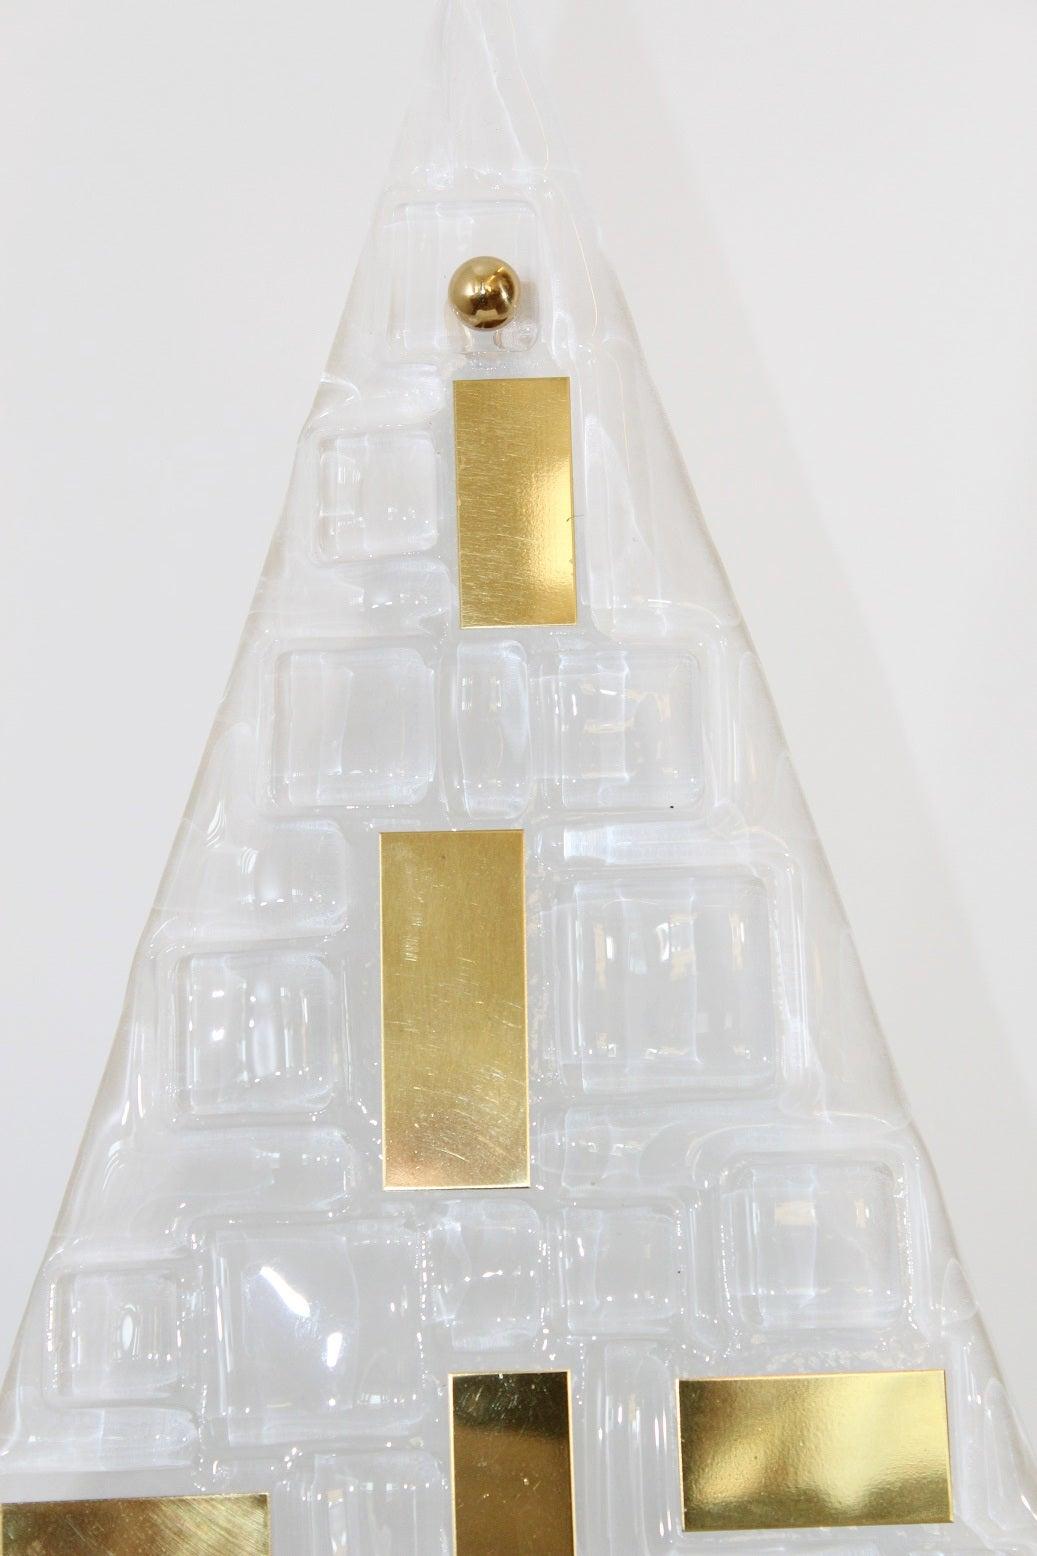 Limited edition Italian modern wall light with frosted triangular textured Murano glass decorated with brass details, mounted on polished brass metal finish frame / exclusively designed by Gianluca Fontana for Fabio Ltd, made in Italy
2-light / E12